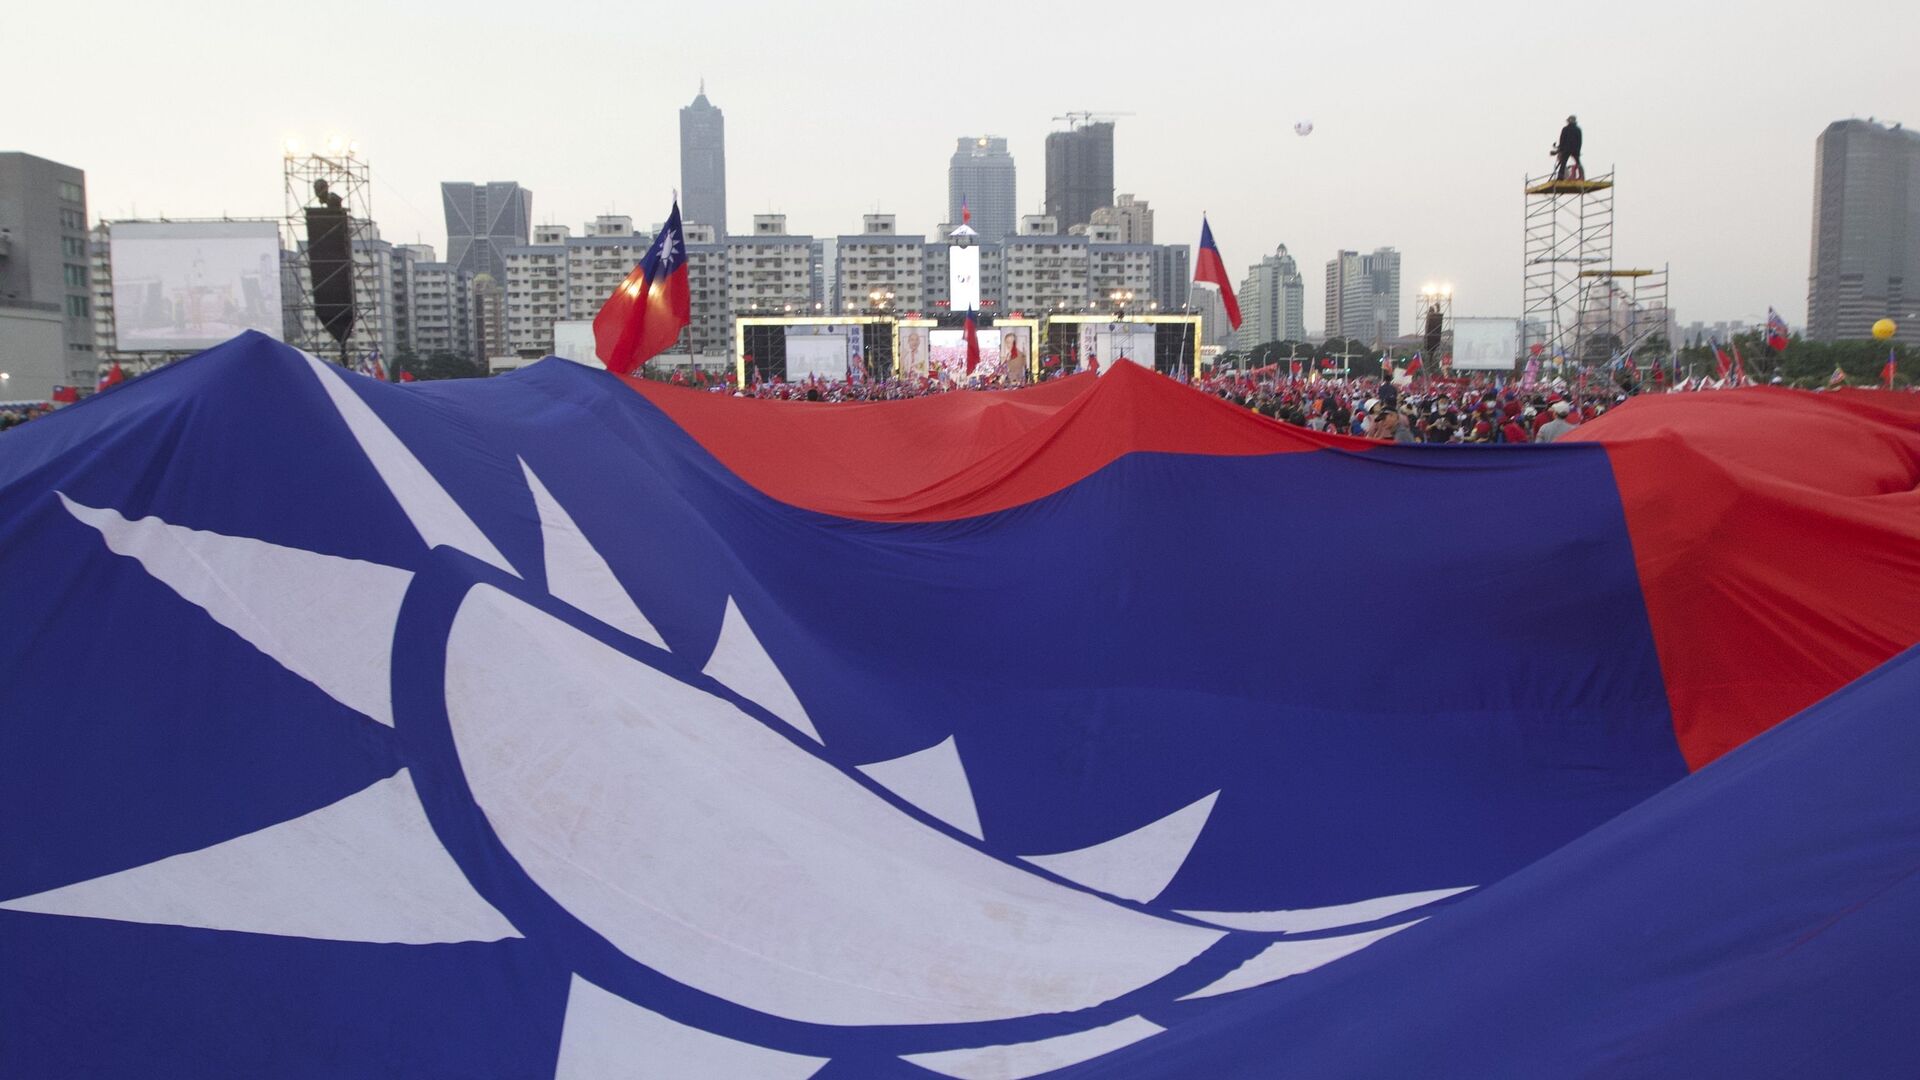 Supporters of Taiwan's 2020 presidential election candidate for the KMT, or Nationalist Party, Han Kuo-yu pass along a giant Taiwanese flag for the start of a campaign rally in southern Taiwan's Kaohsiung city on Friday, Jan 10, 2020 - Sputnik International, 1920, 05.10.2021